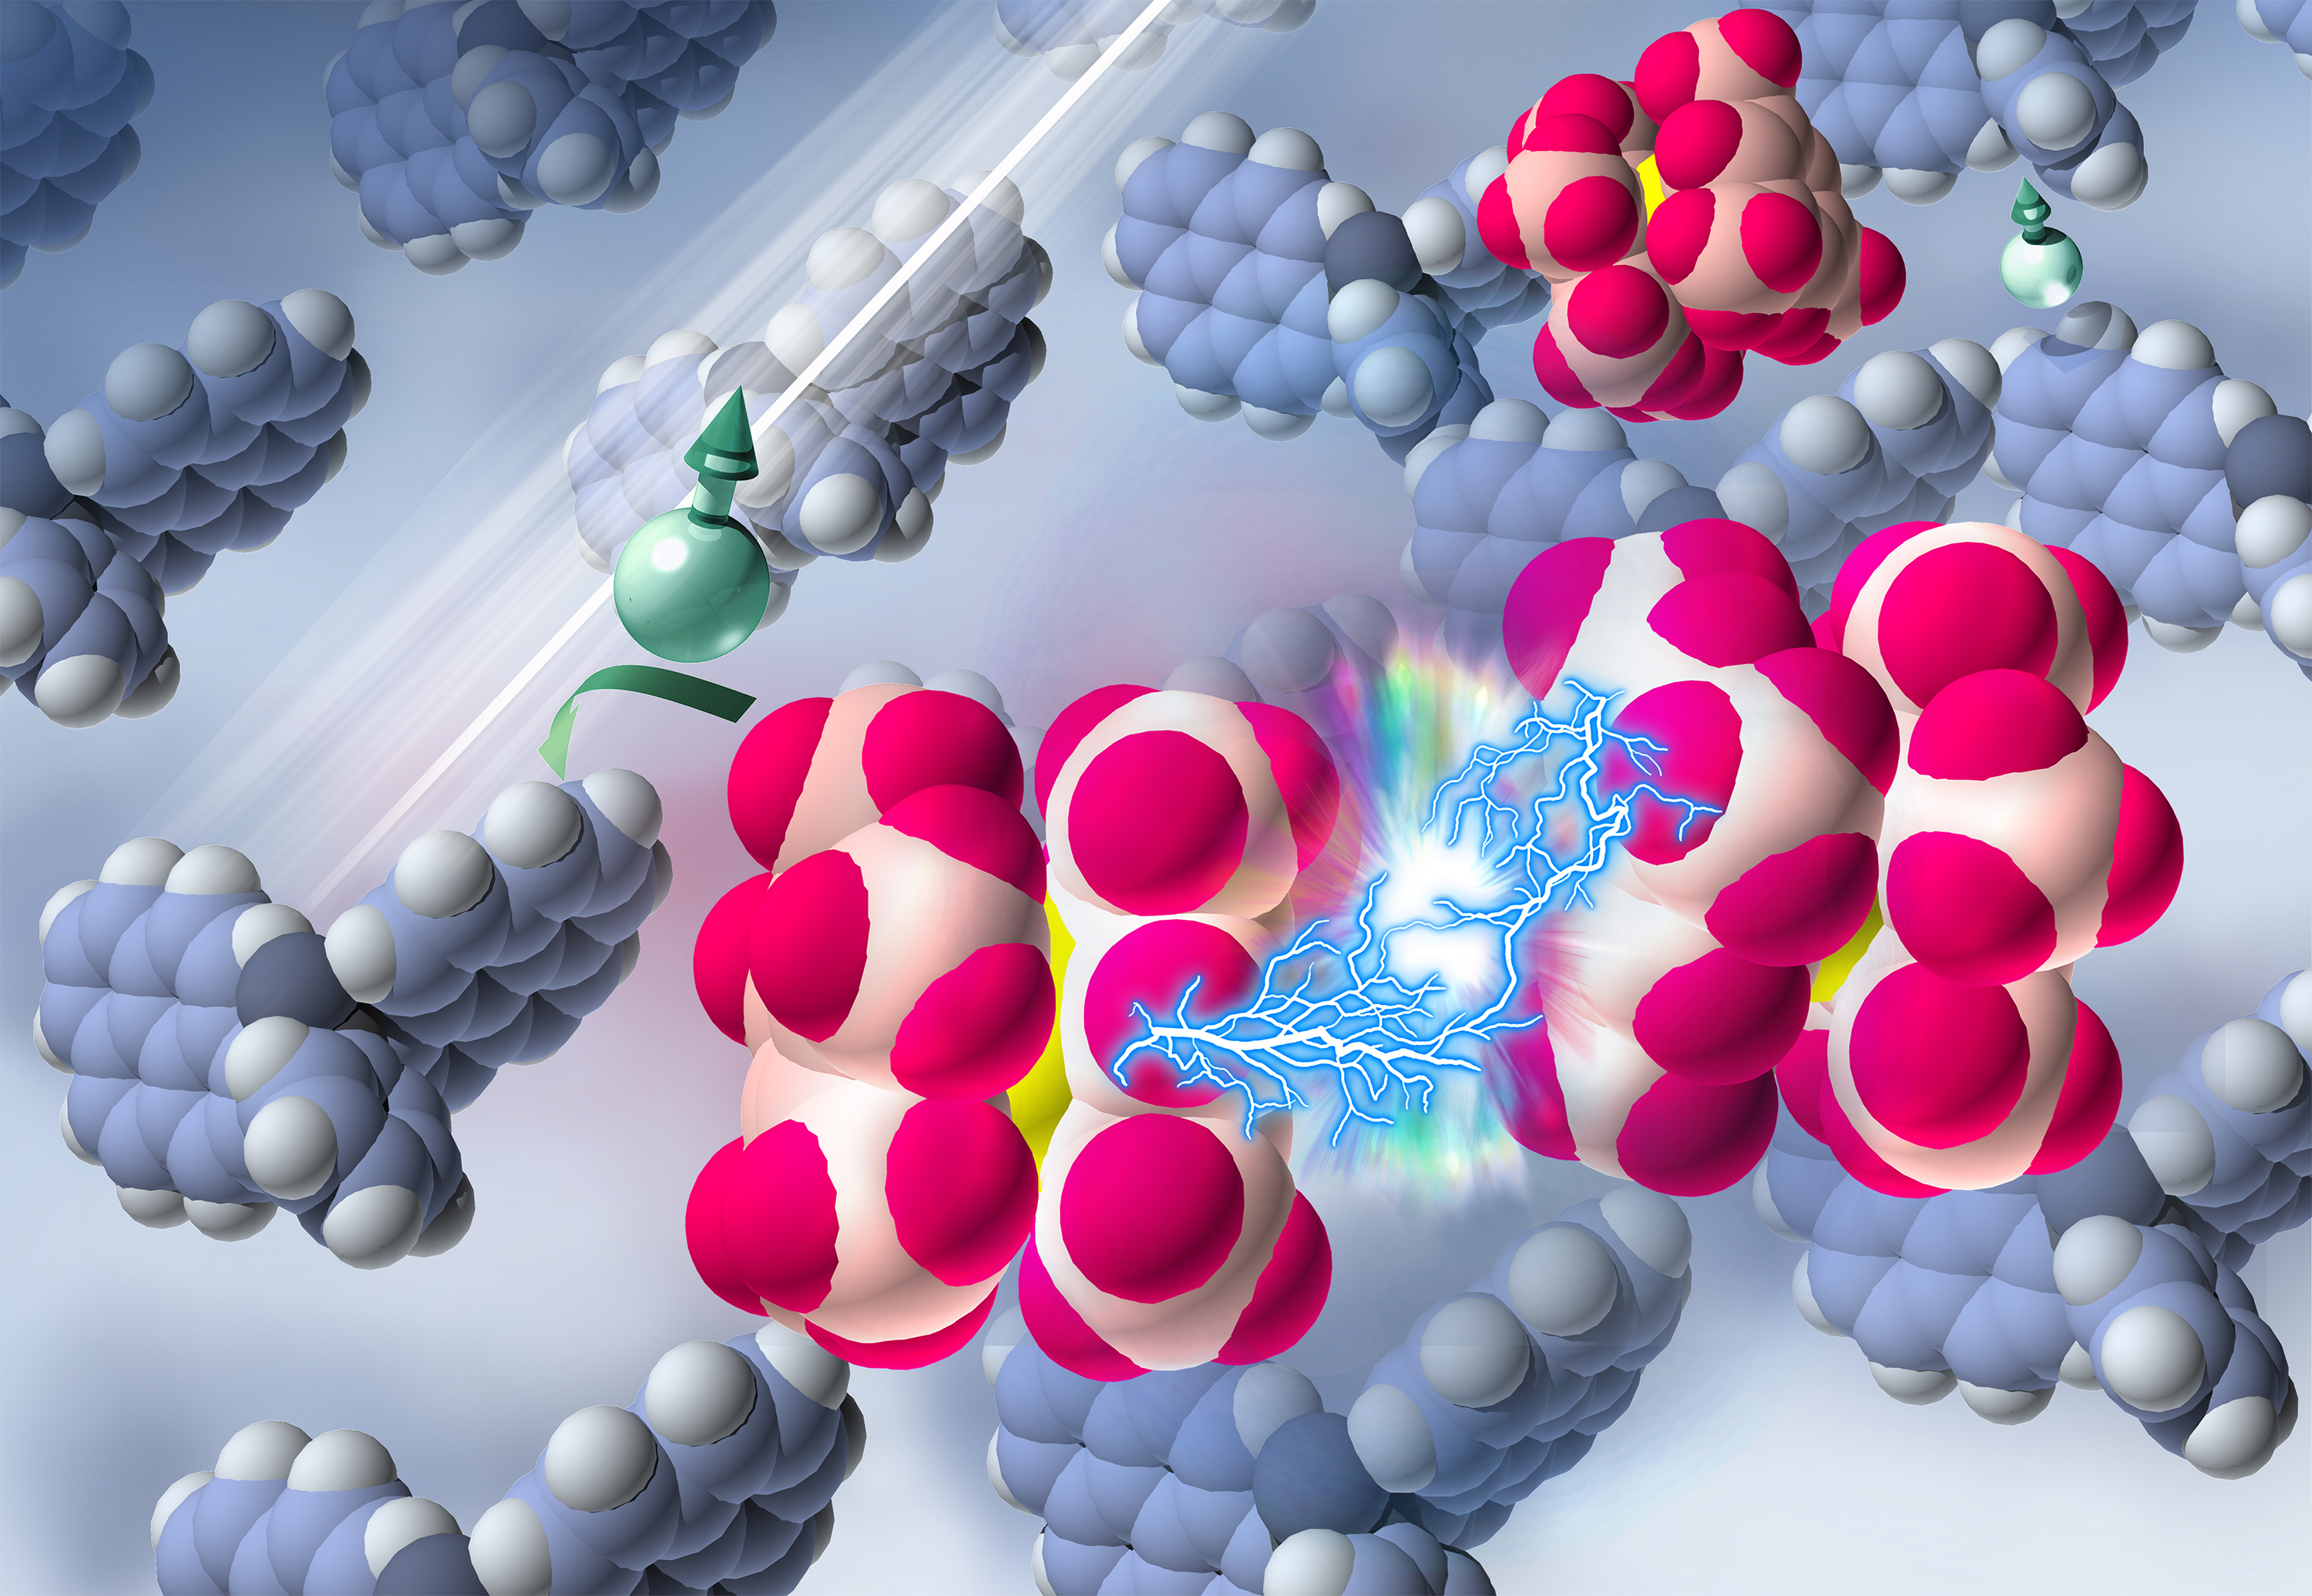 Researchers used ultraviolet light to excite molecules in a semiconductor, triggering reactions that split up and activated a dopant. Credit: Princeton University / Jing Wang and Xin Lin